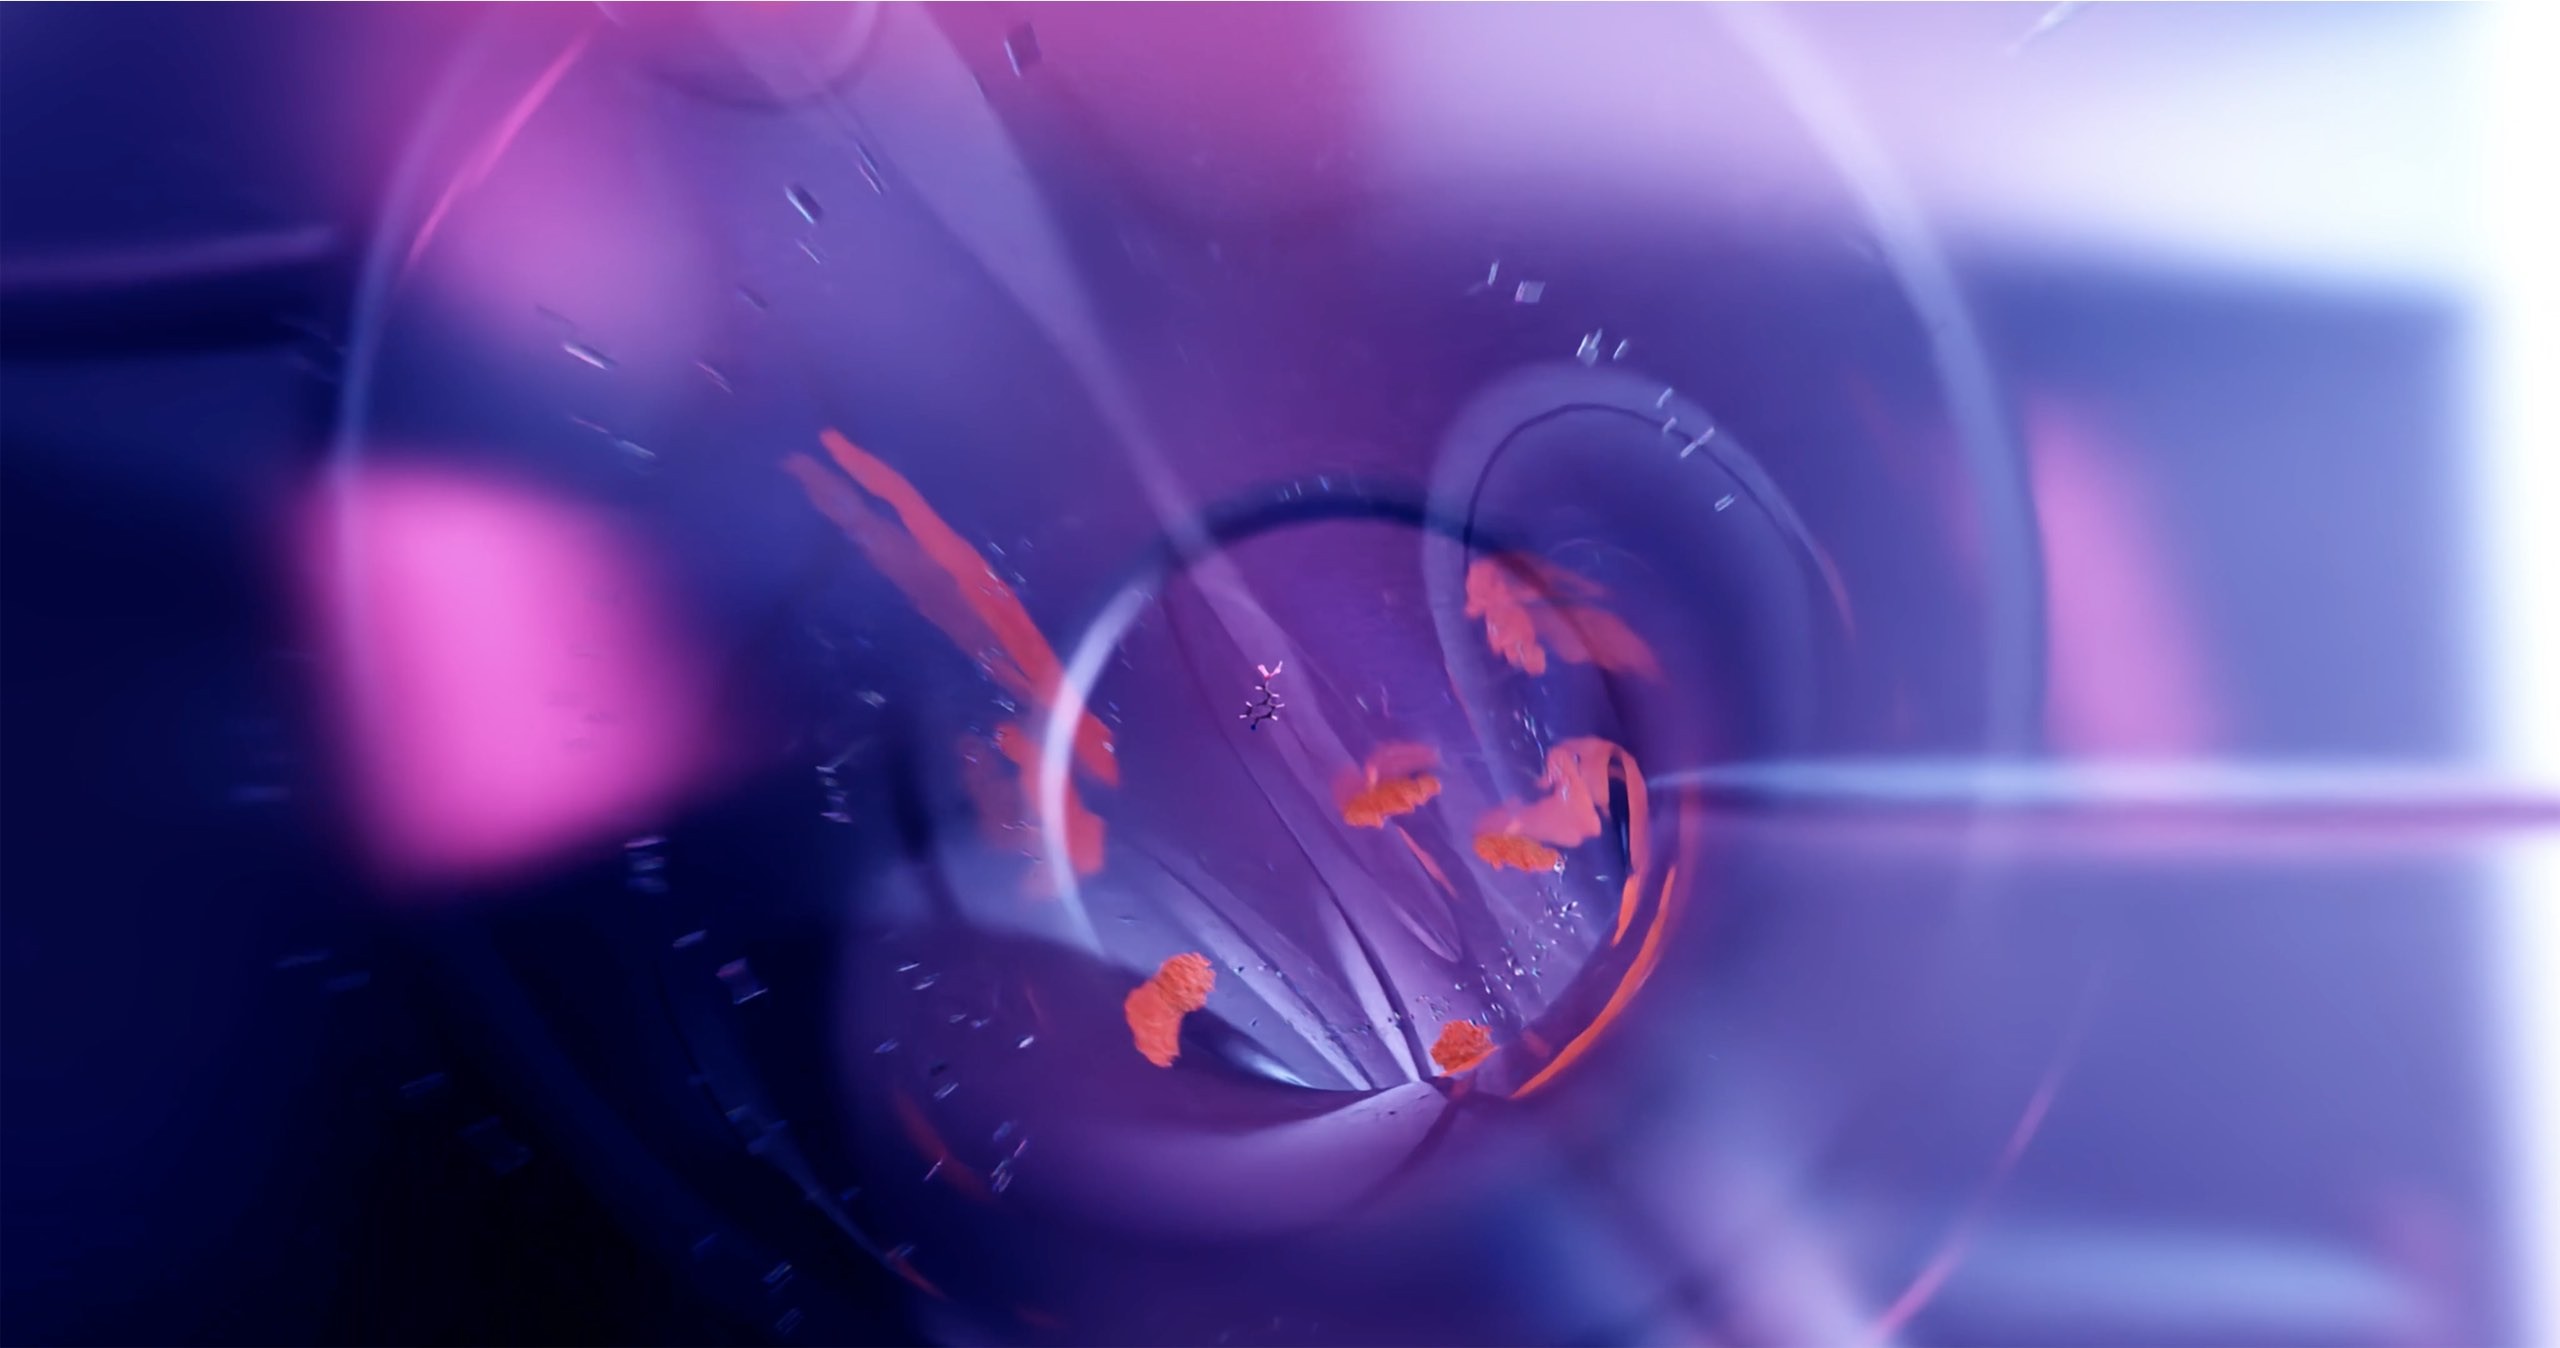 Proteins flowing through tube in purple shown in 3D animation.jpg